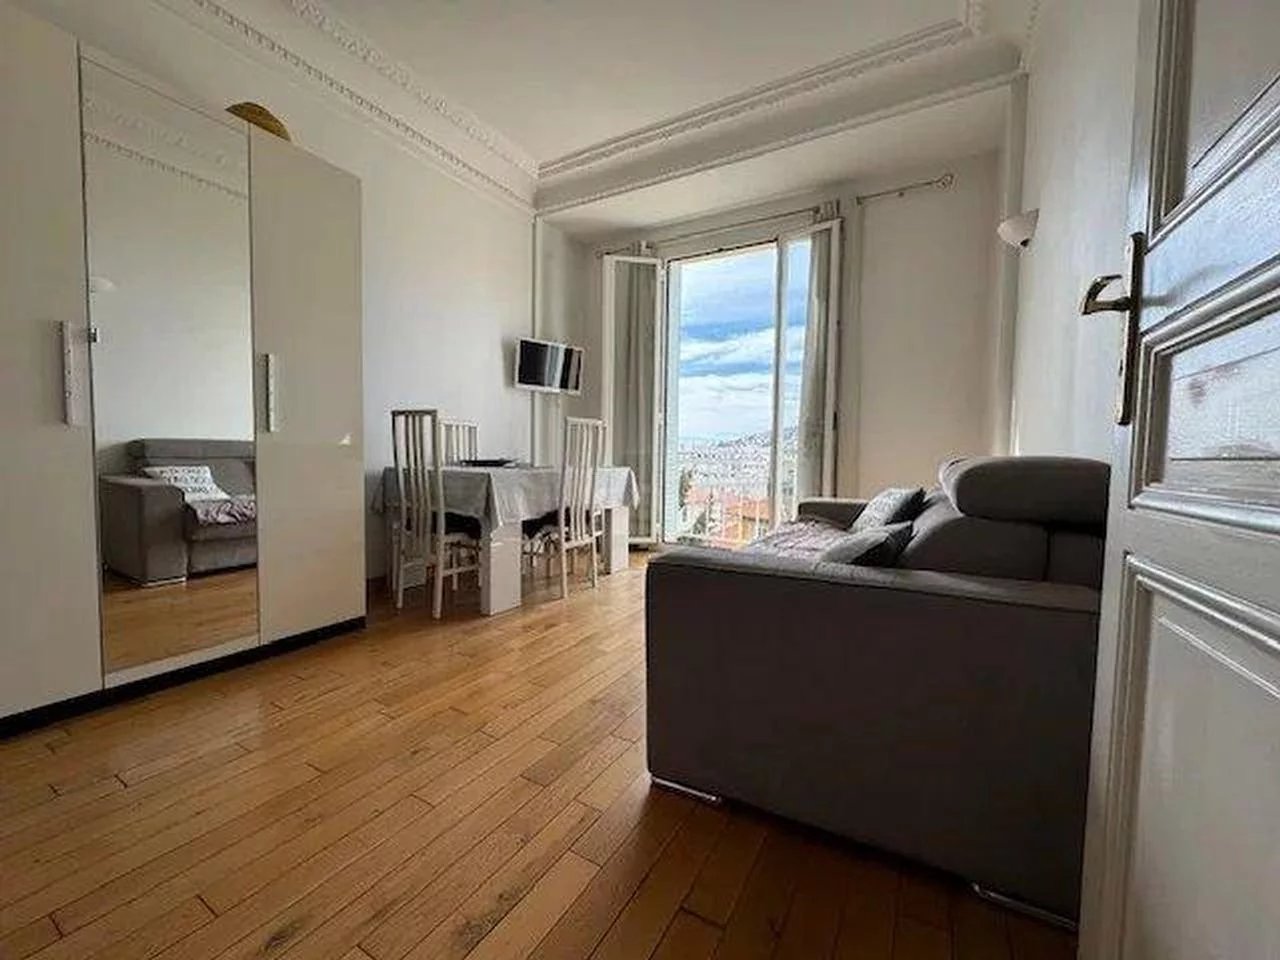 Appartement  2 Rooms 30m2  for sale   235 000 €